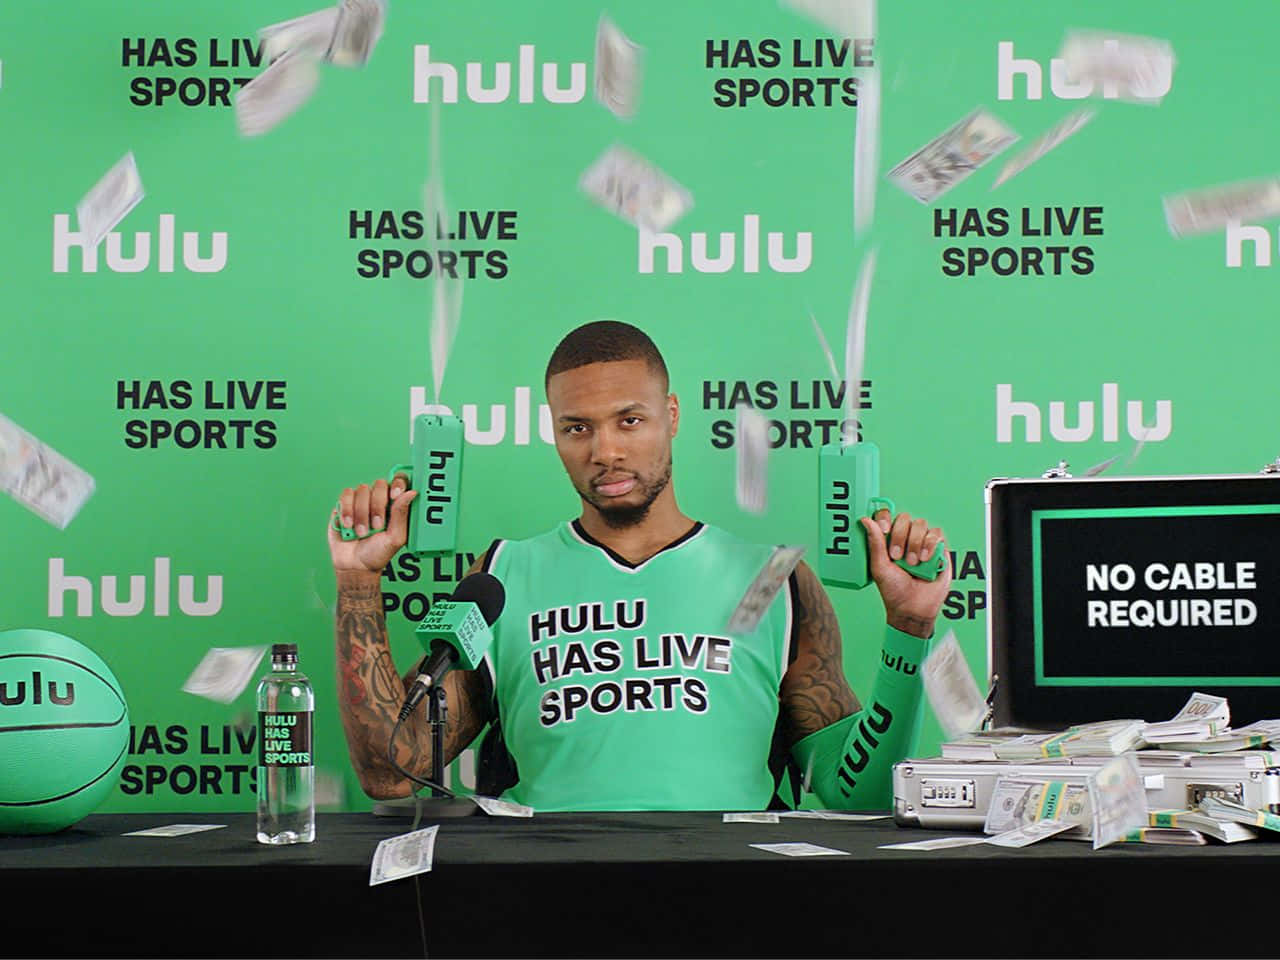 Stream your favorite shows on Hulu